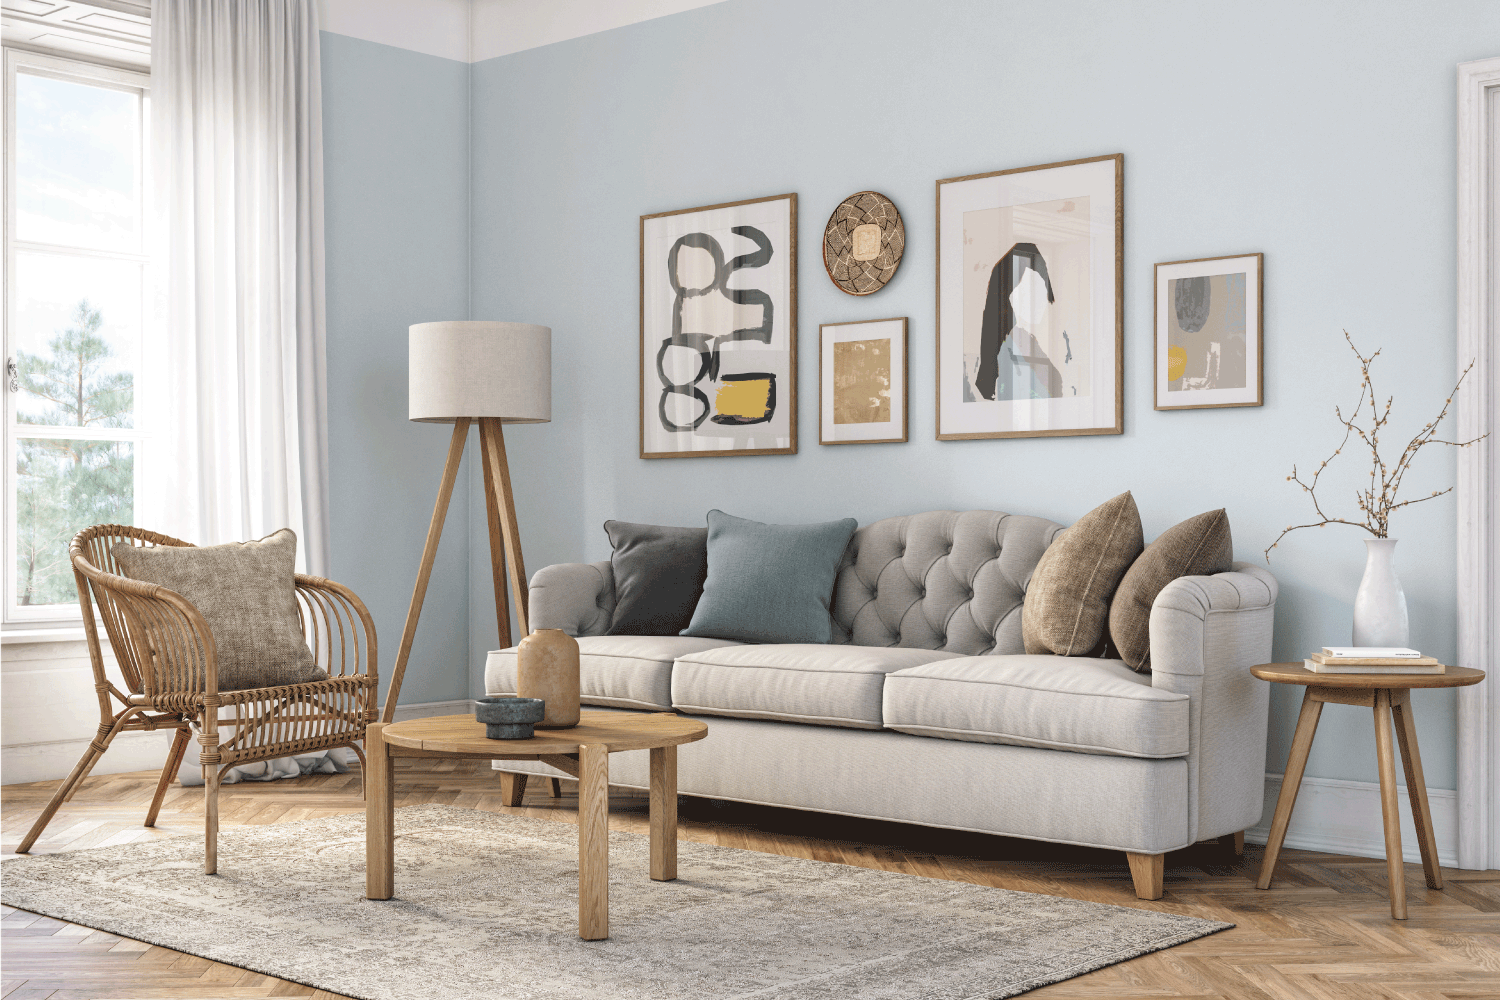 Bohemian living room interior with beige colored furniture and wooden elements and light blue colored wall